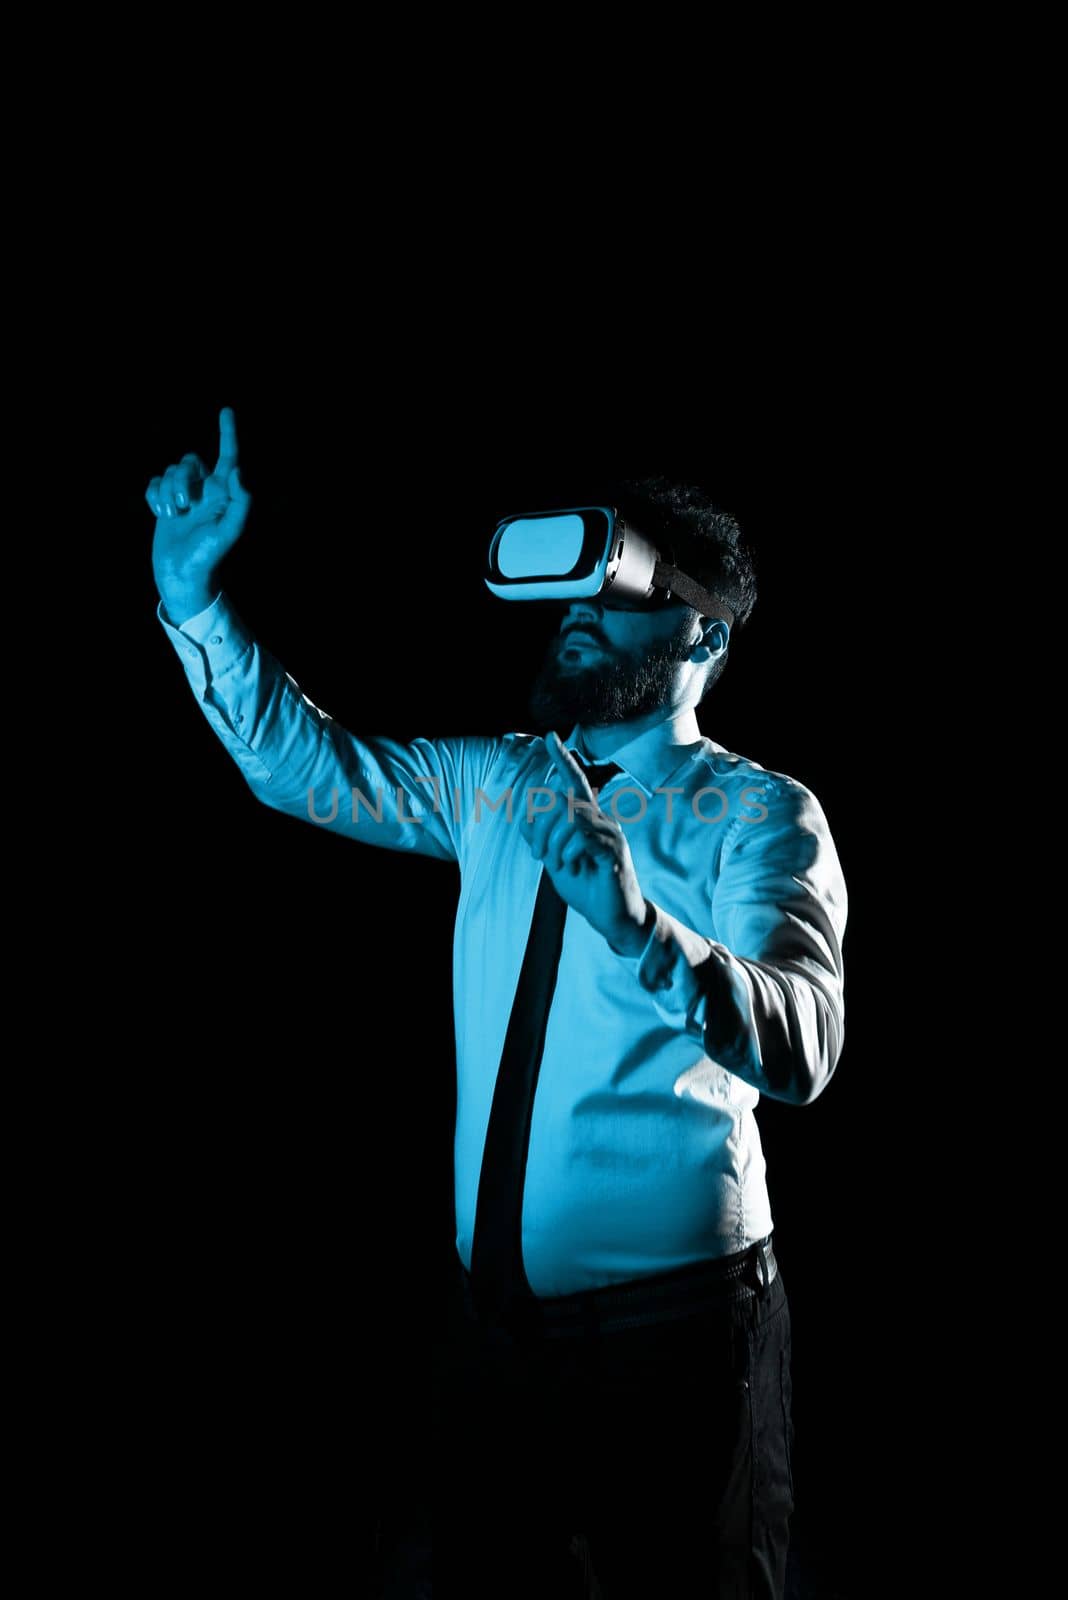 Man Wearing Vr Glasses And Pointing On Important Messages With two Fingers. Businessman Having Virtual Reality Eyeglasses And Showing Crutial Informations. by nialowwa